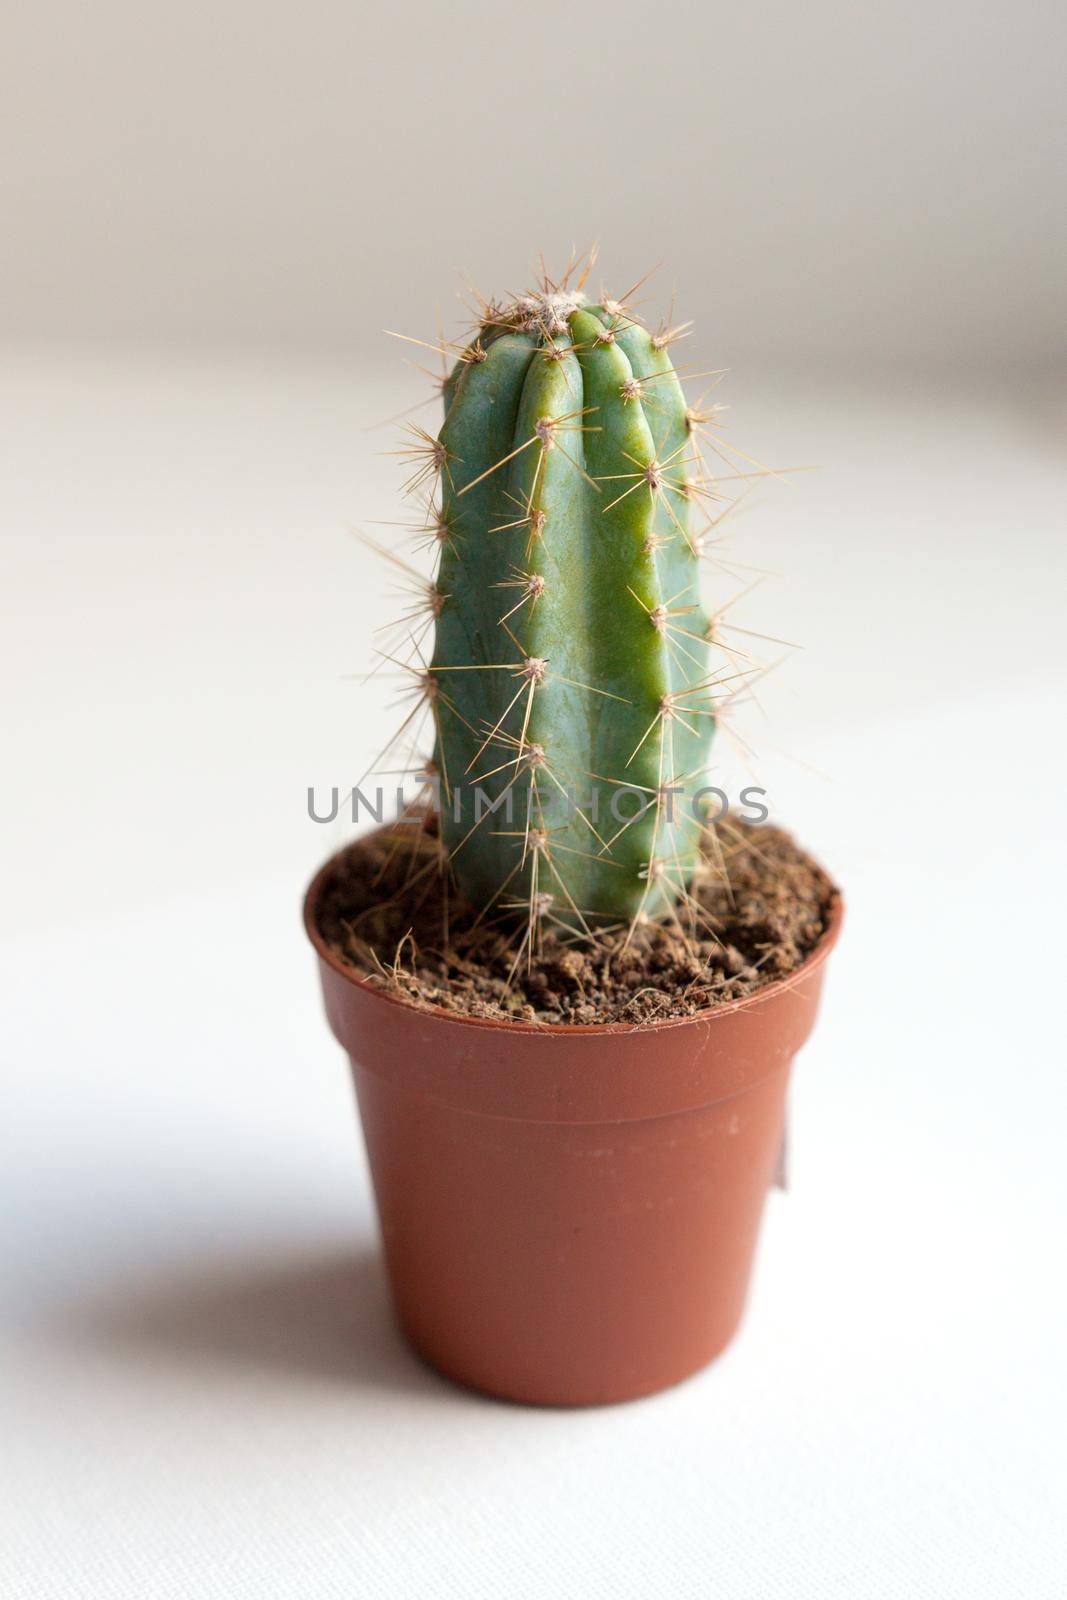 green cactus in brown pot on white background by dreamloud